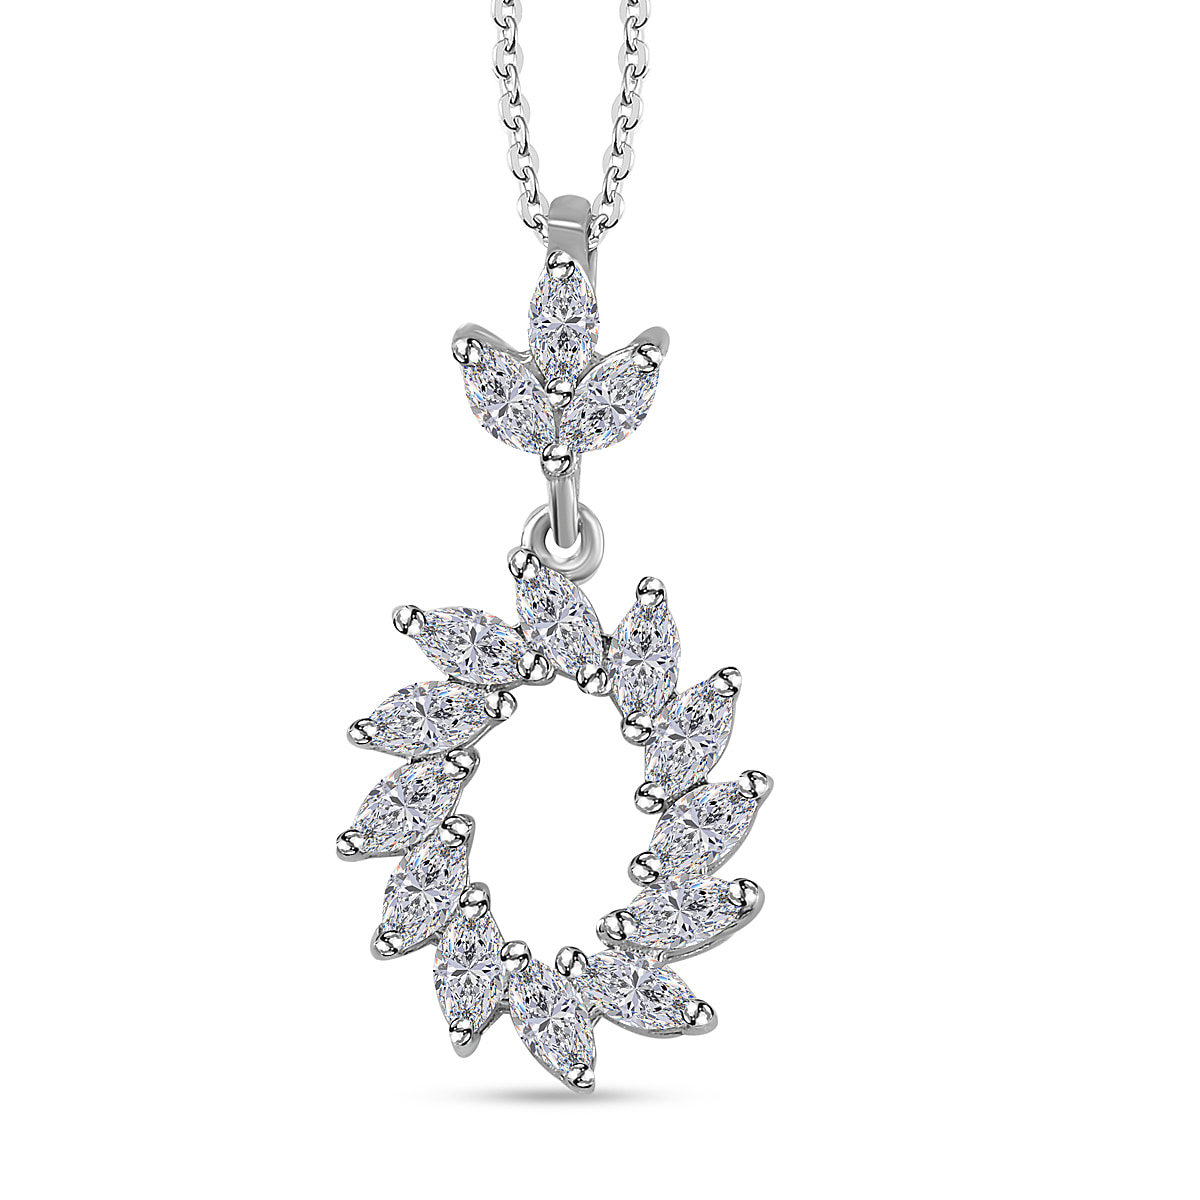 Moissanite Pendant with Chain (Size 20) in Platinum Overlay Sterling Silver 1.00 Ct.